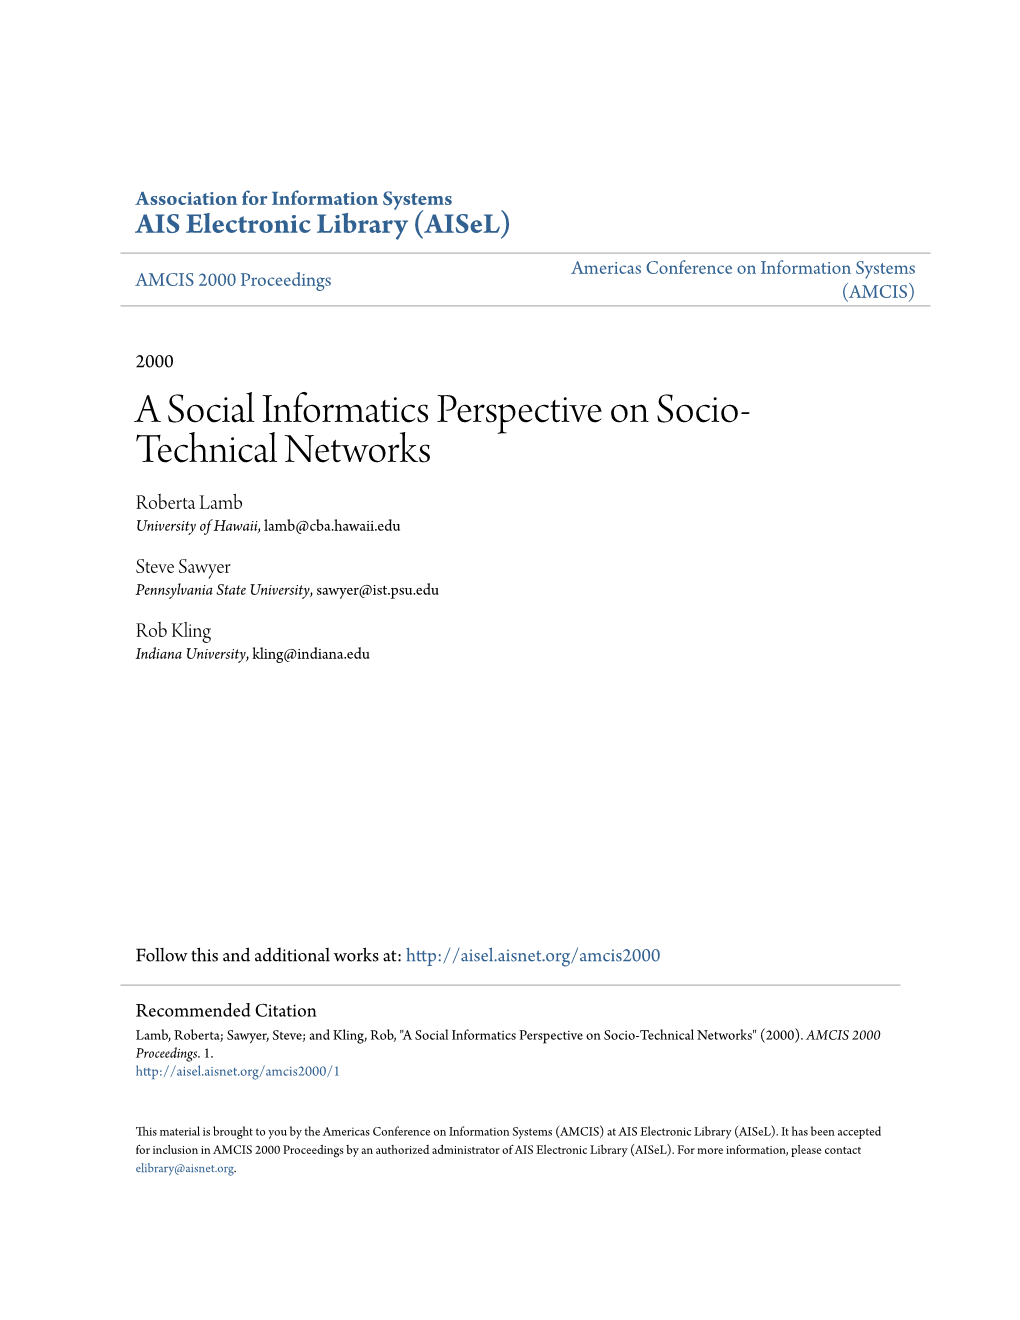 A Social Informatics Perspective on Socio-Technical Networks" (2000)